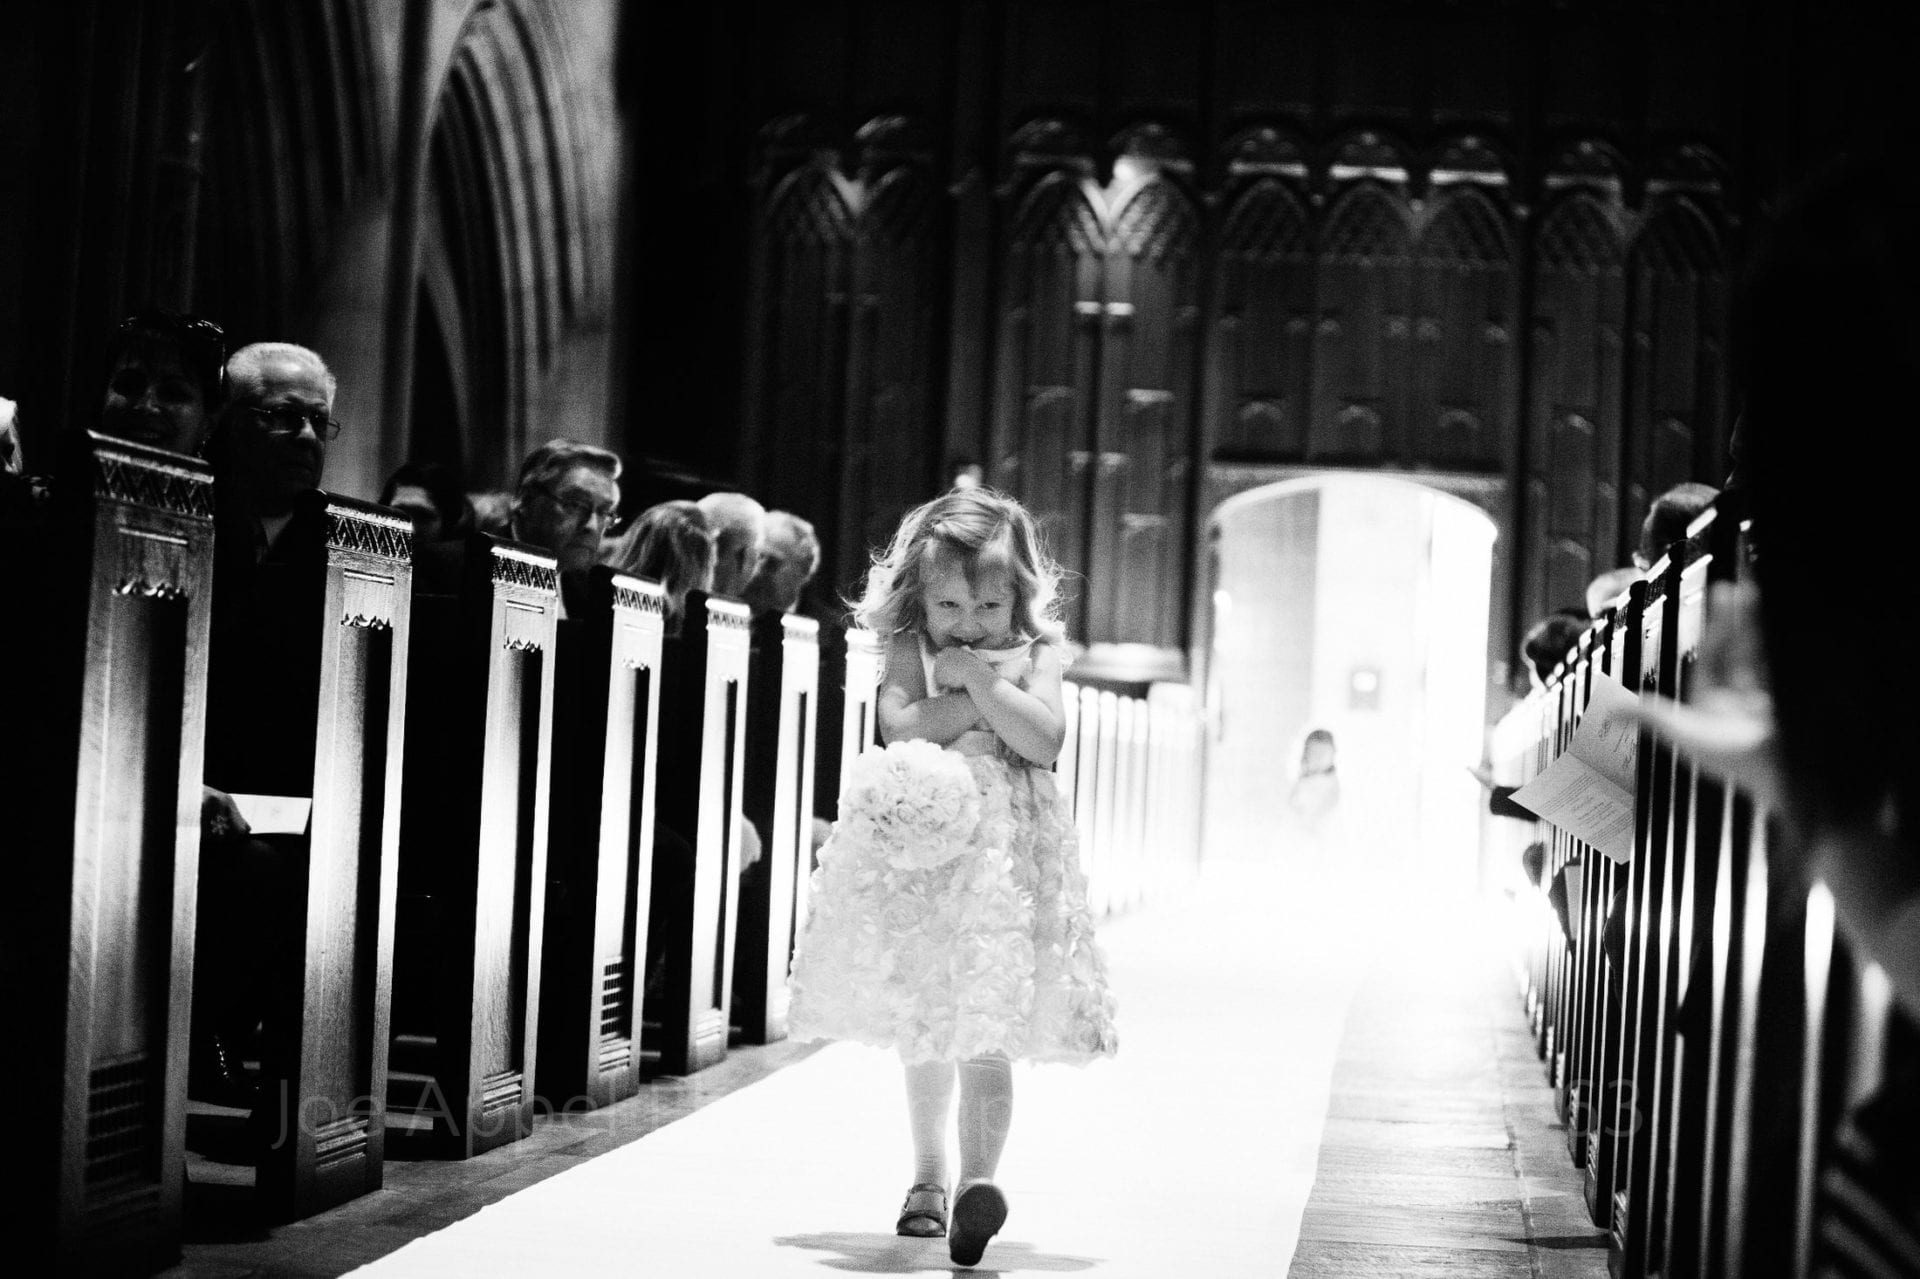 A little girl shyly walks down the aisle at heinz chapel during a wedding.